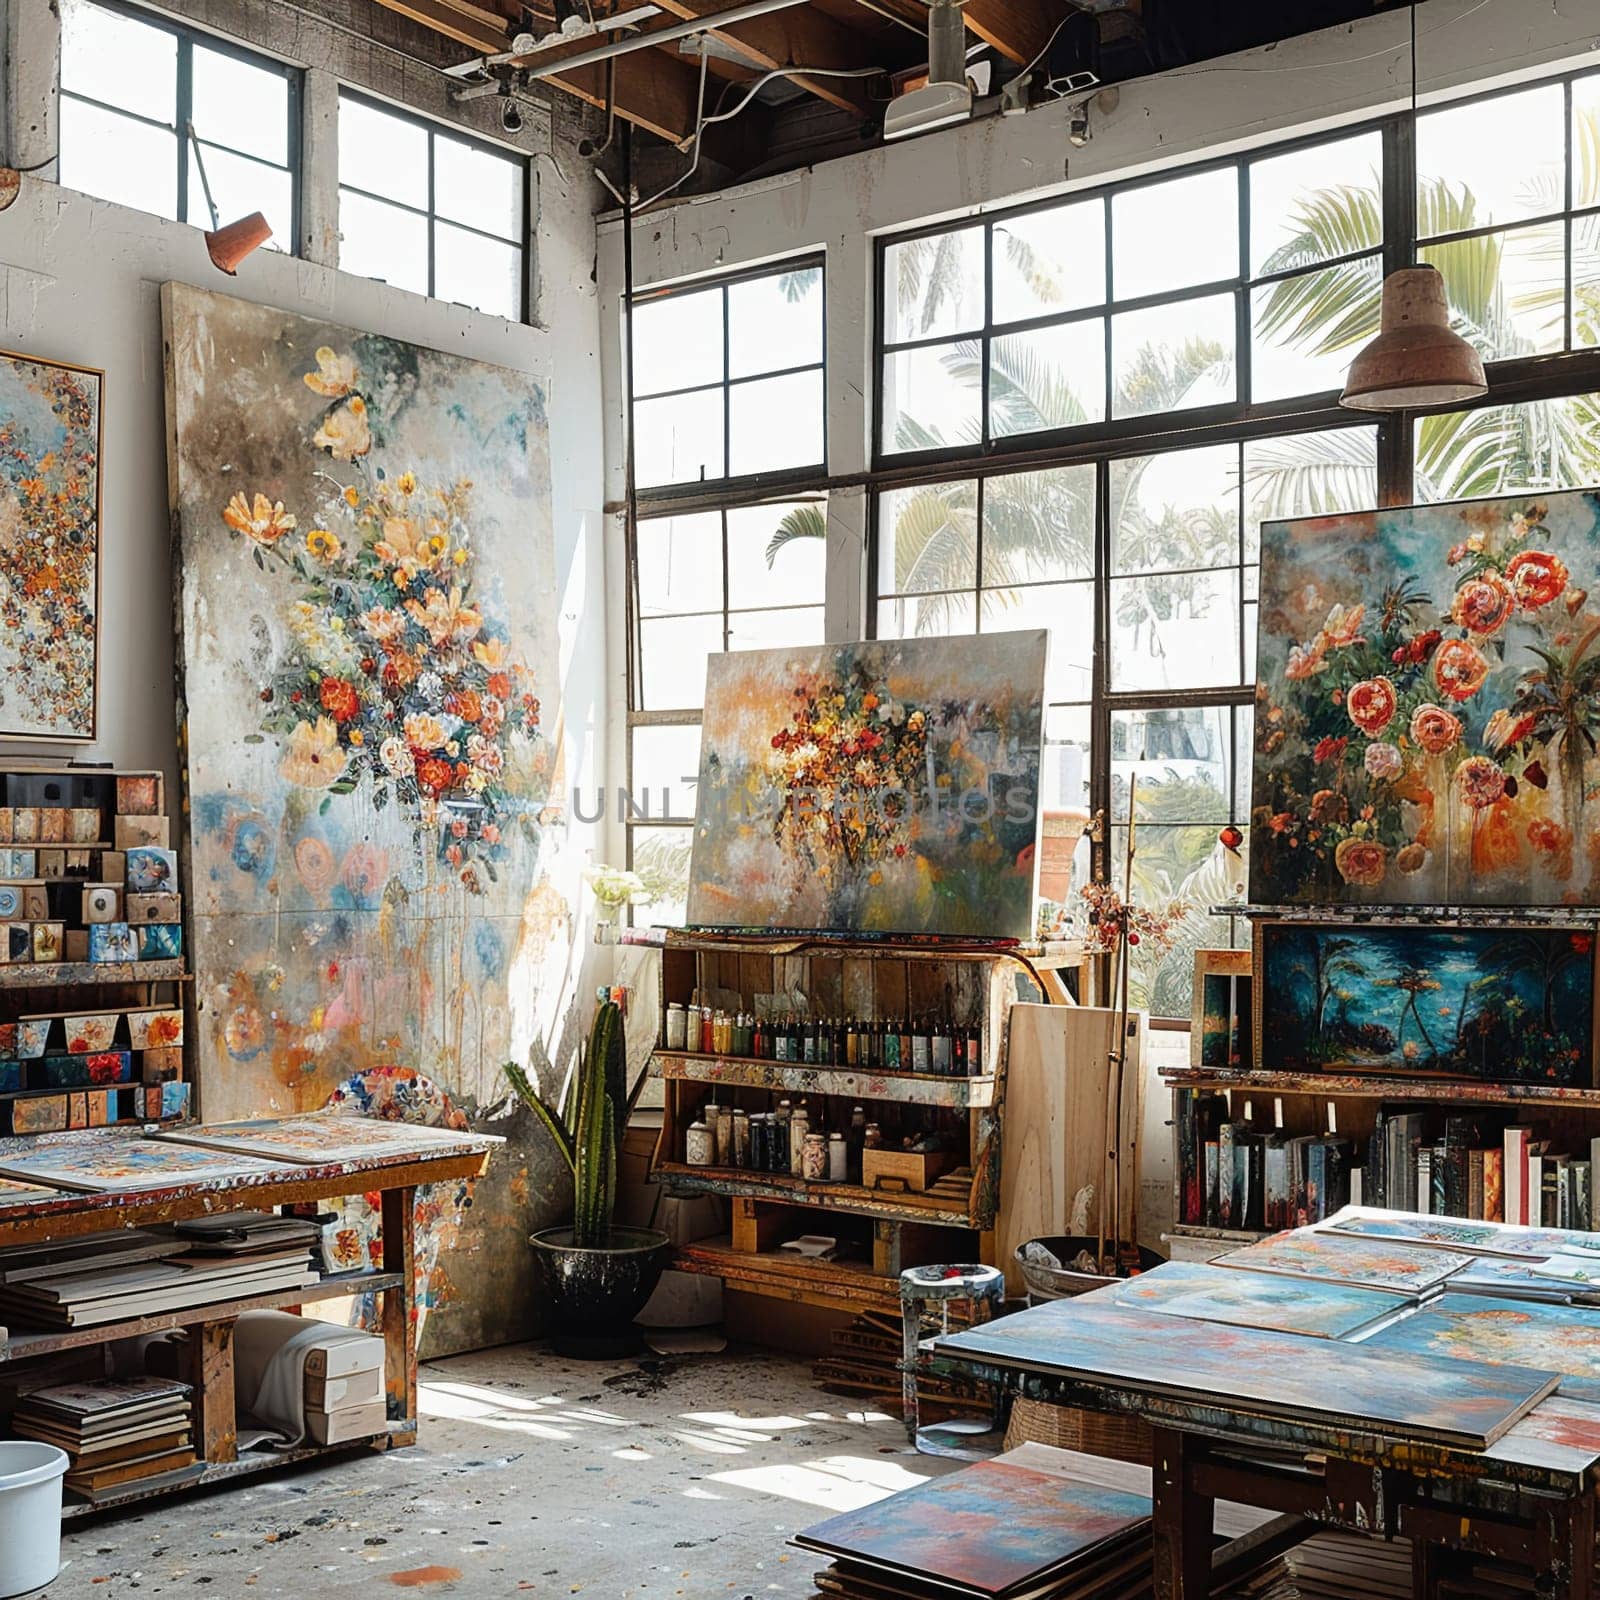 Contemporary art studio with large canvases and natural light flooding in